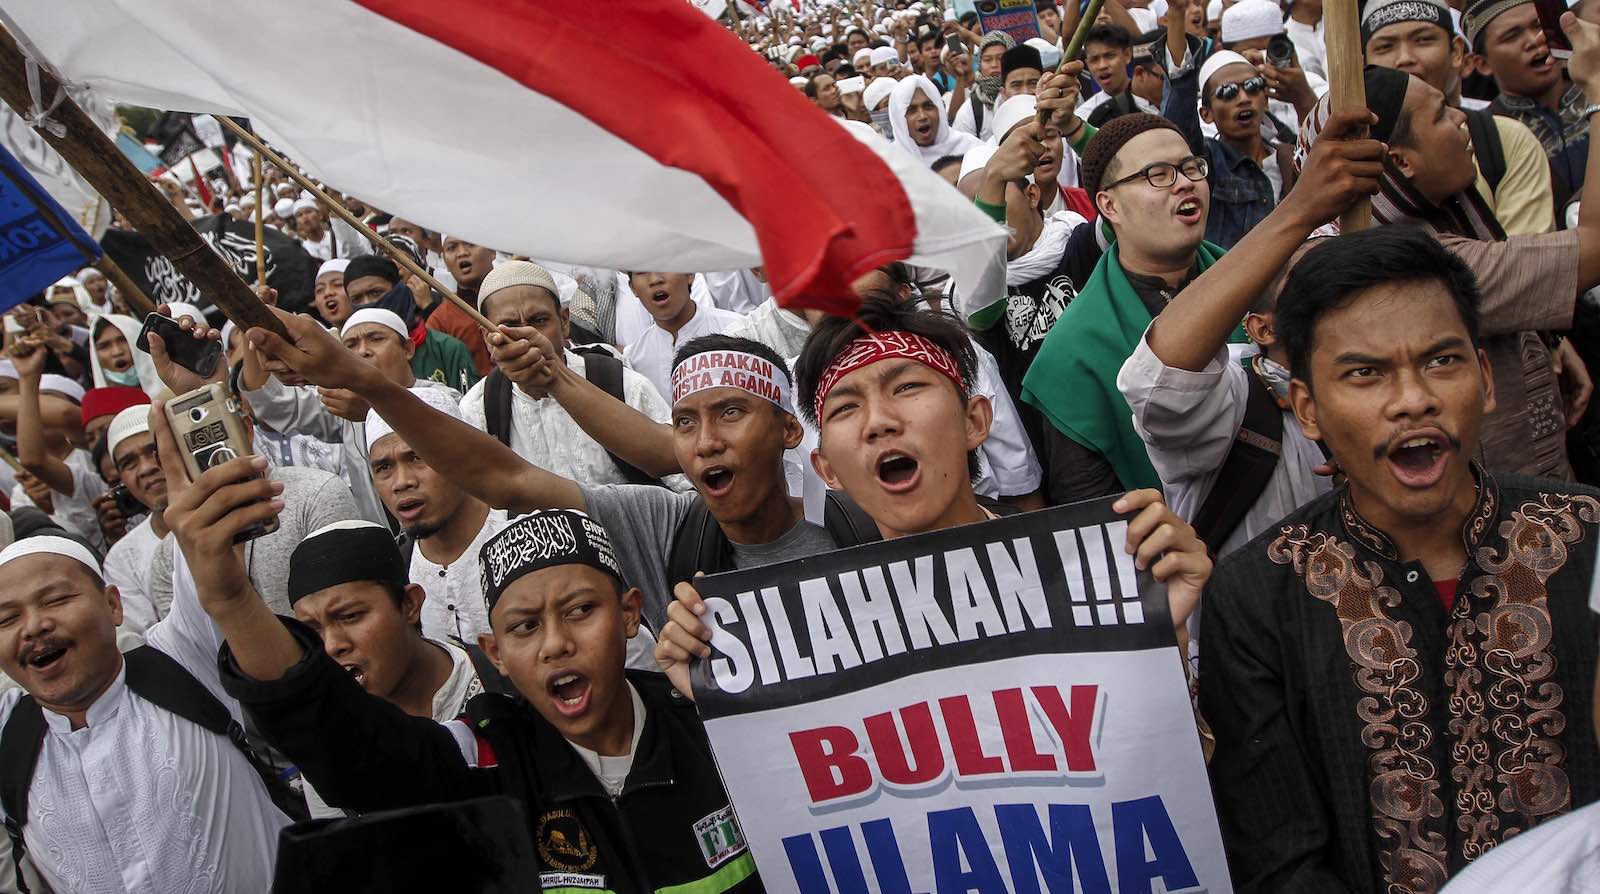 Protests in May 2017 against Jakarta's governor Basuki “Ahok” Purnama in the lead up to a blasphemy trial (Photo: Barcroft Media via Getty)